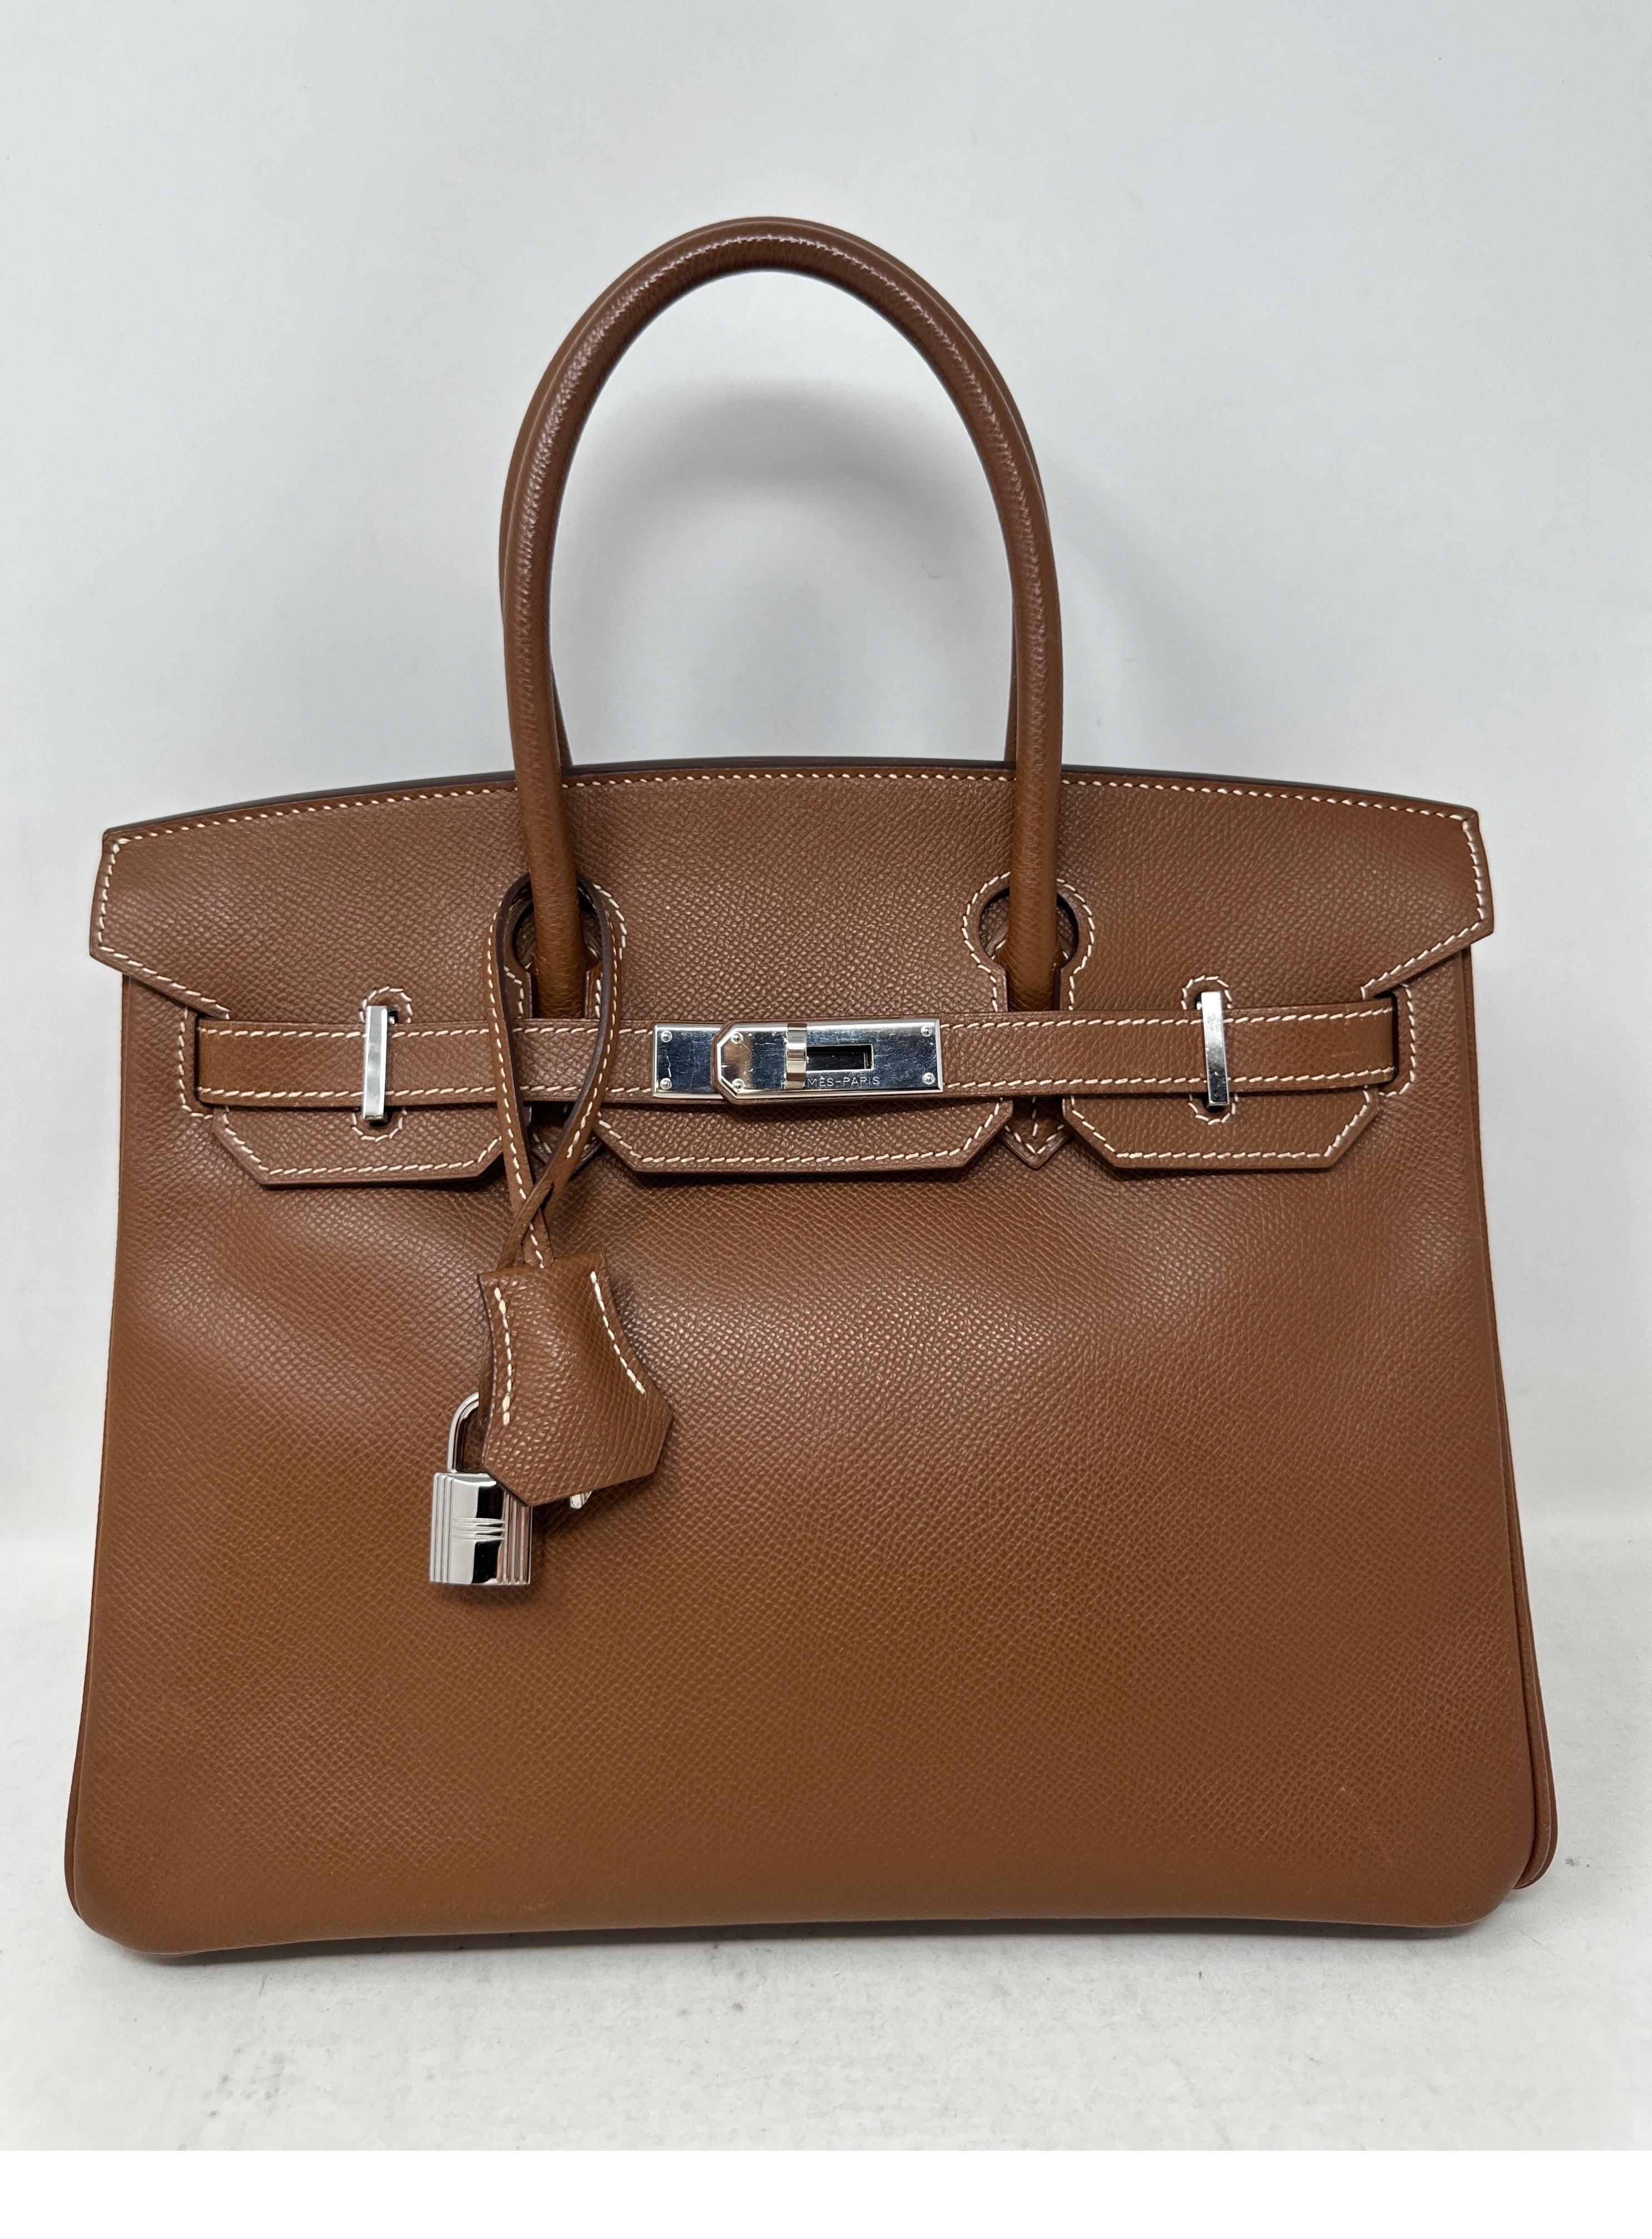 Hermes Gold Birkin 30 Bag. Palladium hardware. Epsom leather. Excellent condition. Interior clean. Gold tan color with contrast white stitching. Classic combination. The most wanted size 30 Birkin. Includes clochette, lock, keys, and dust bag.